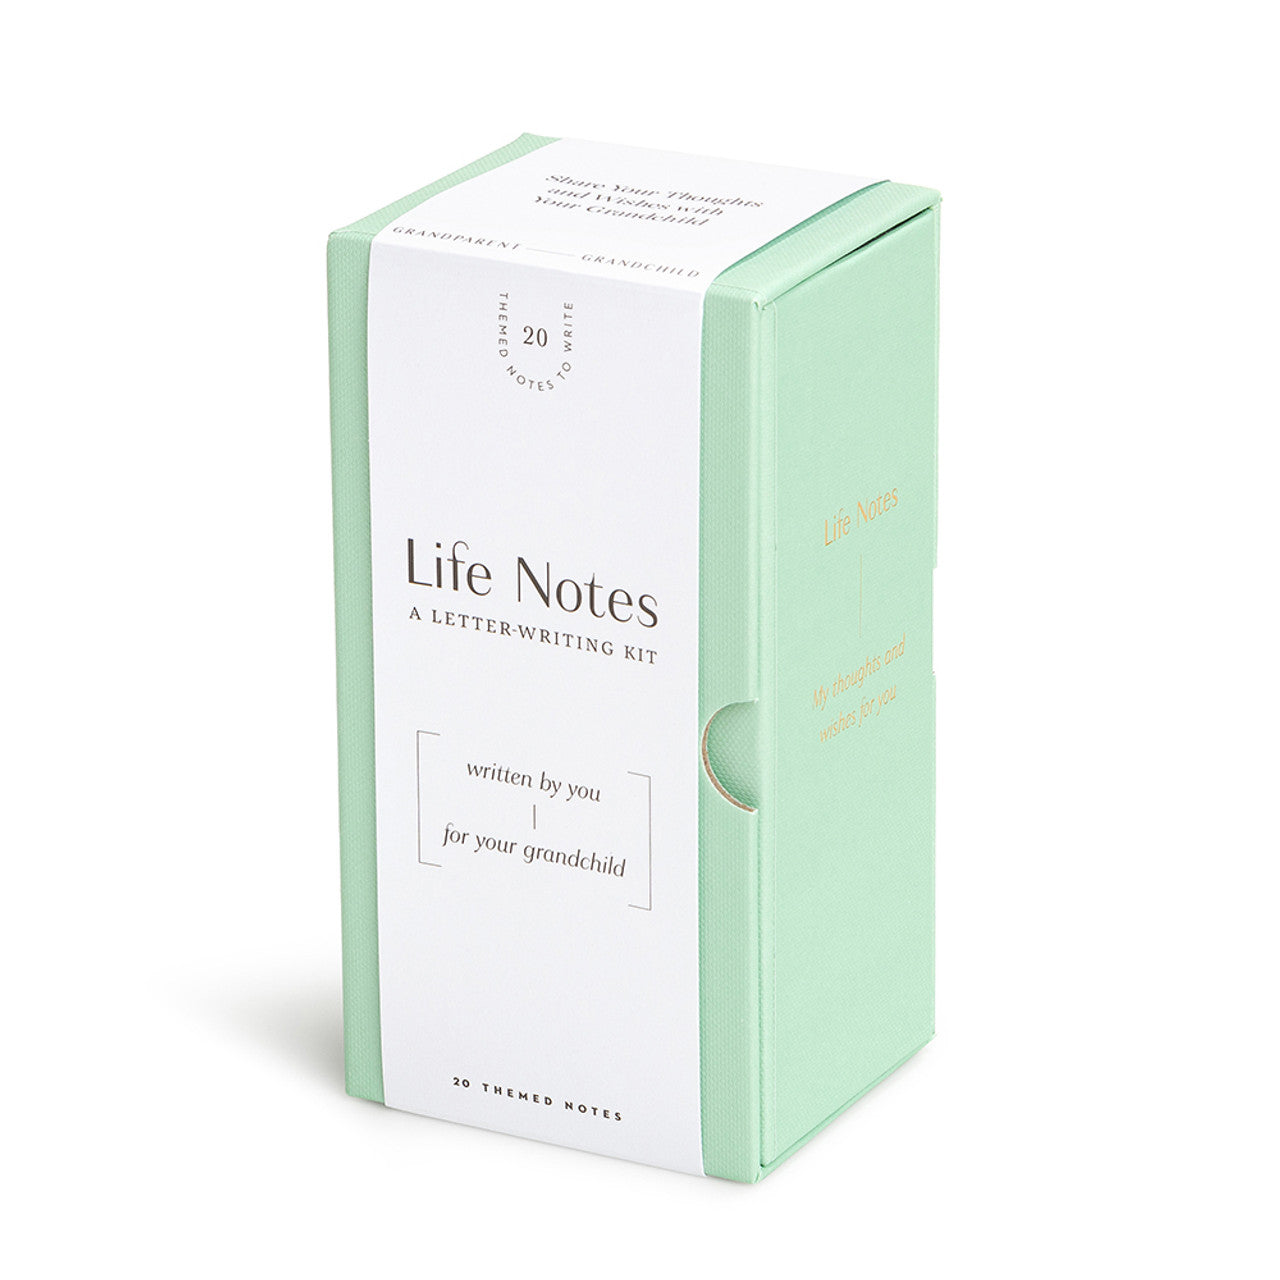 Life Notes- A Letter-Writing Kit Written by You for Your Grandchild